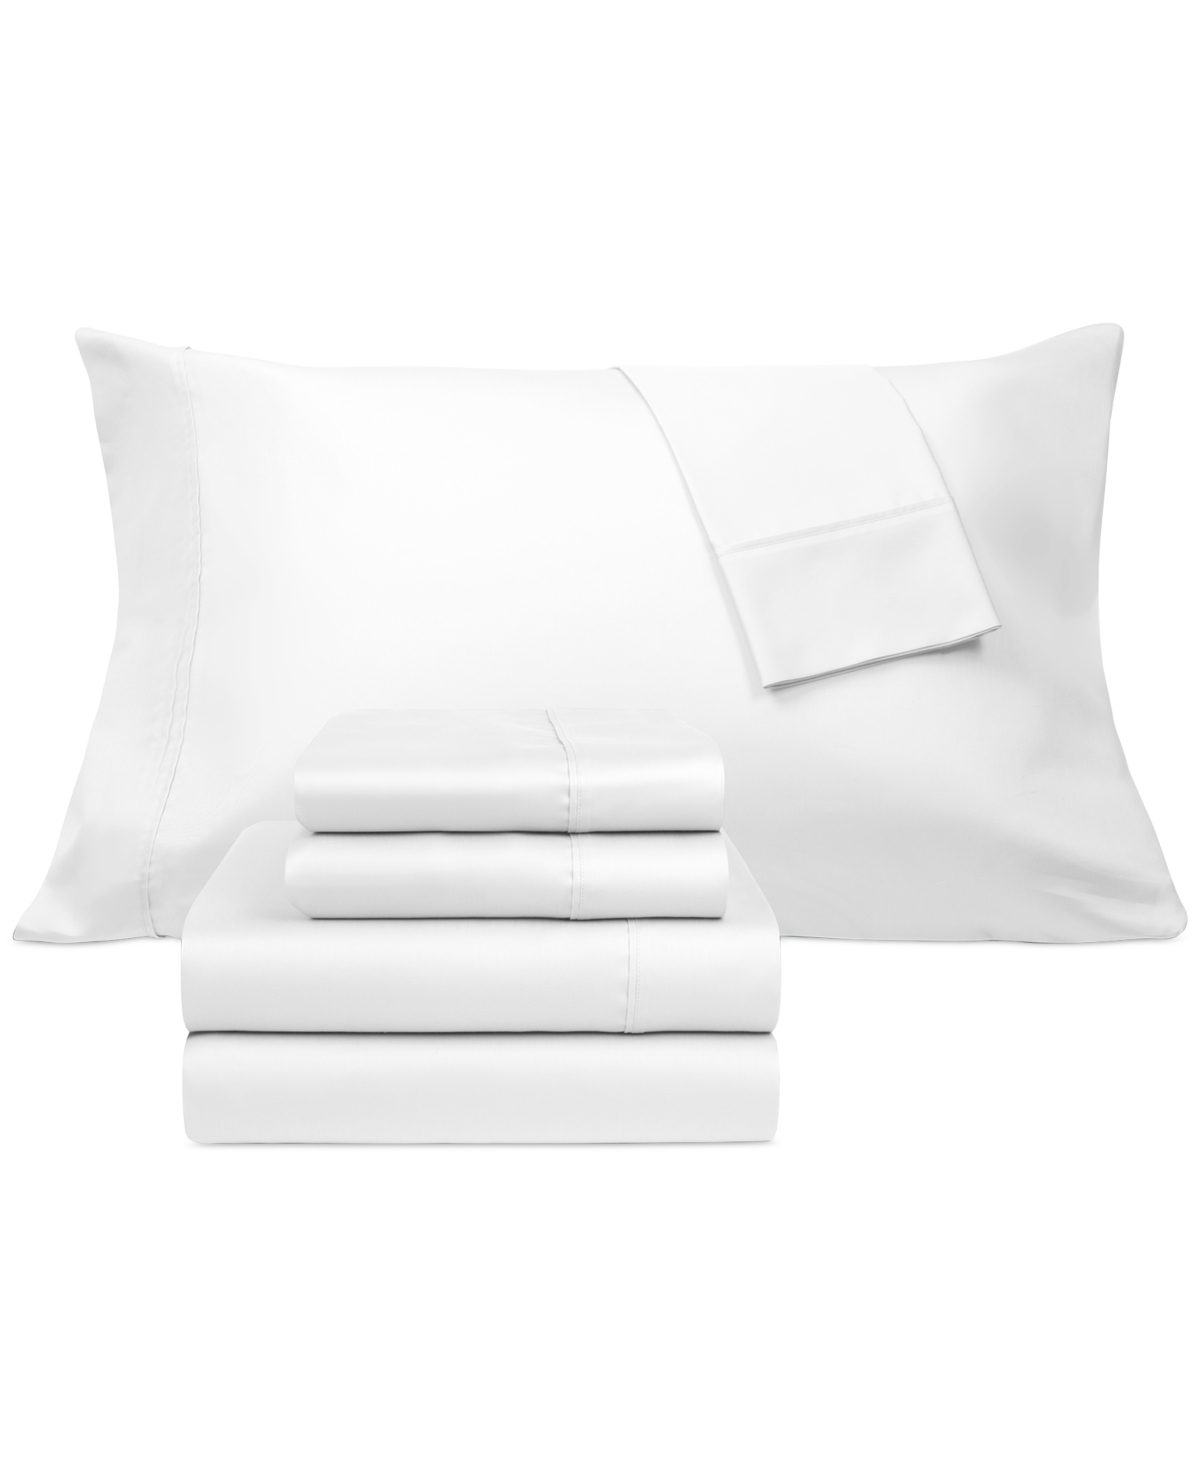 Aq Textiles Coolcomfort 800 Thread Count 6-pc. Sheet Set, King Bedding In White